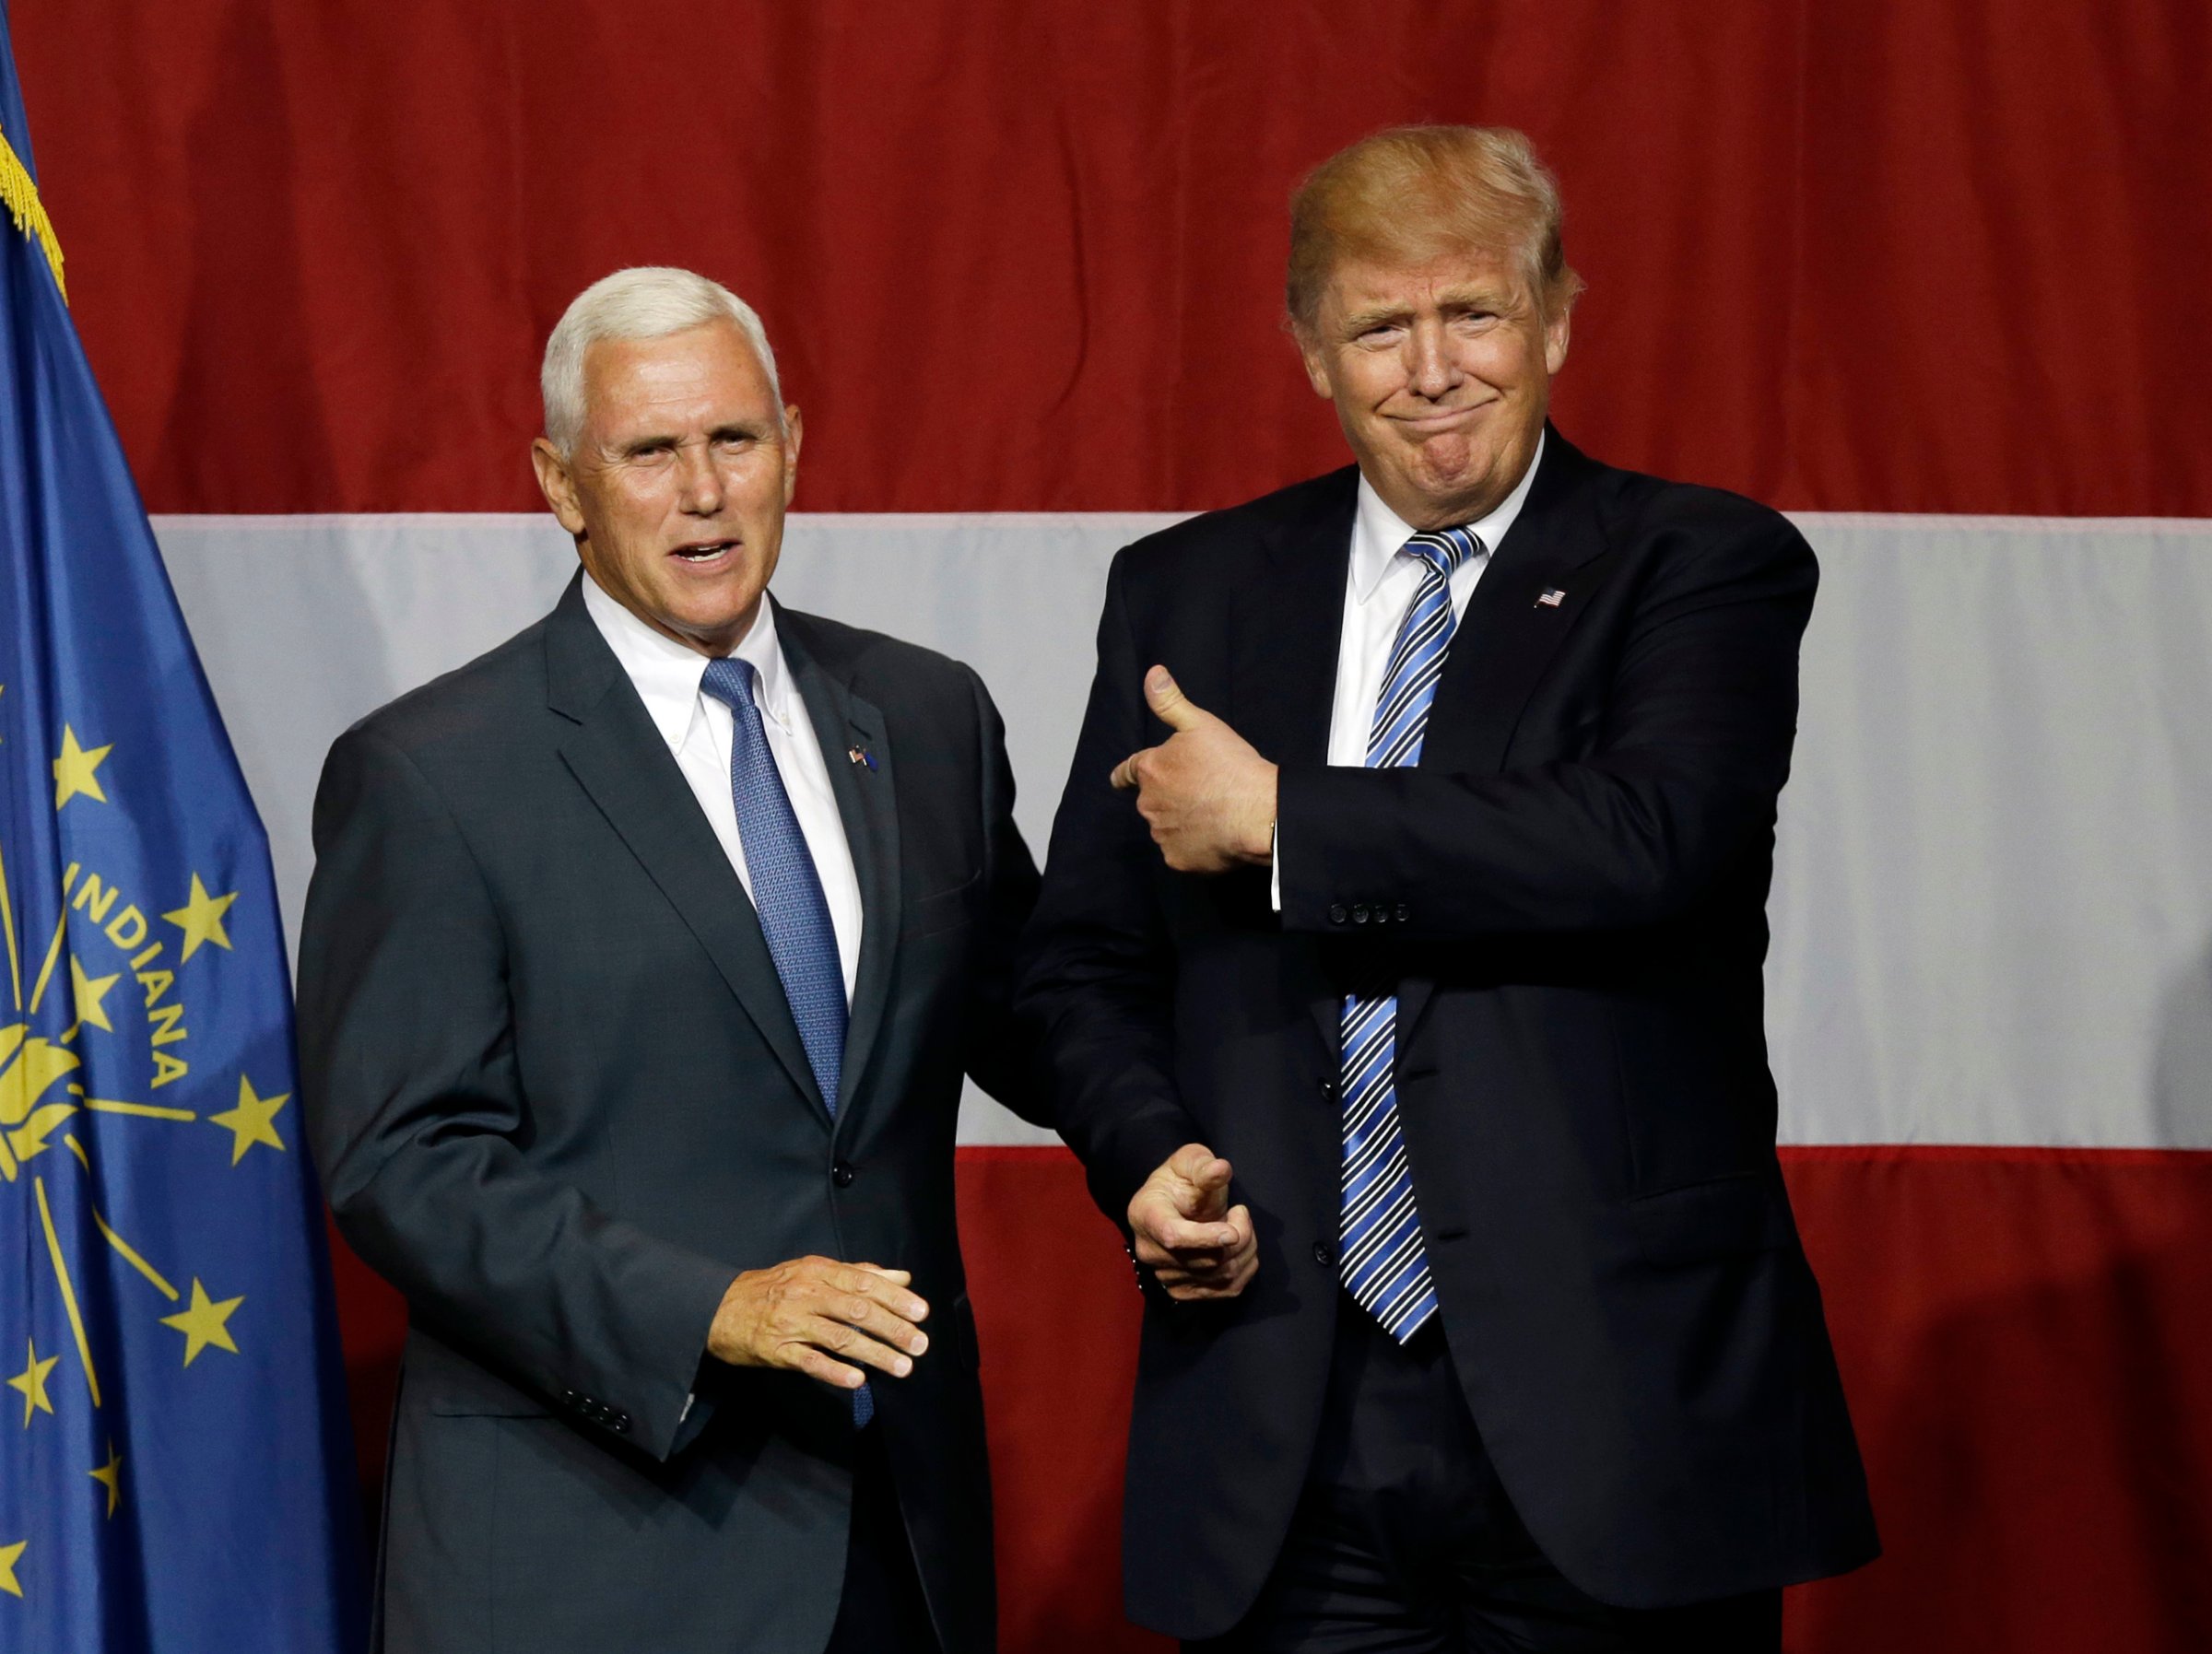 Indiana Gov. Mike Pence joins Republican presidential candidate Donald Trump at a rally in Westfield, Ind. on July 12, 2016.